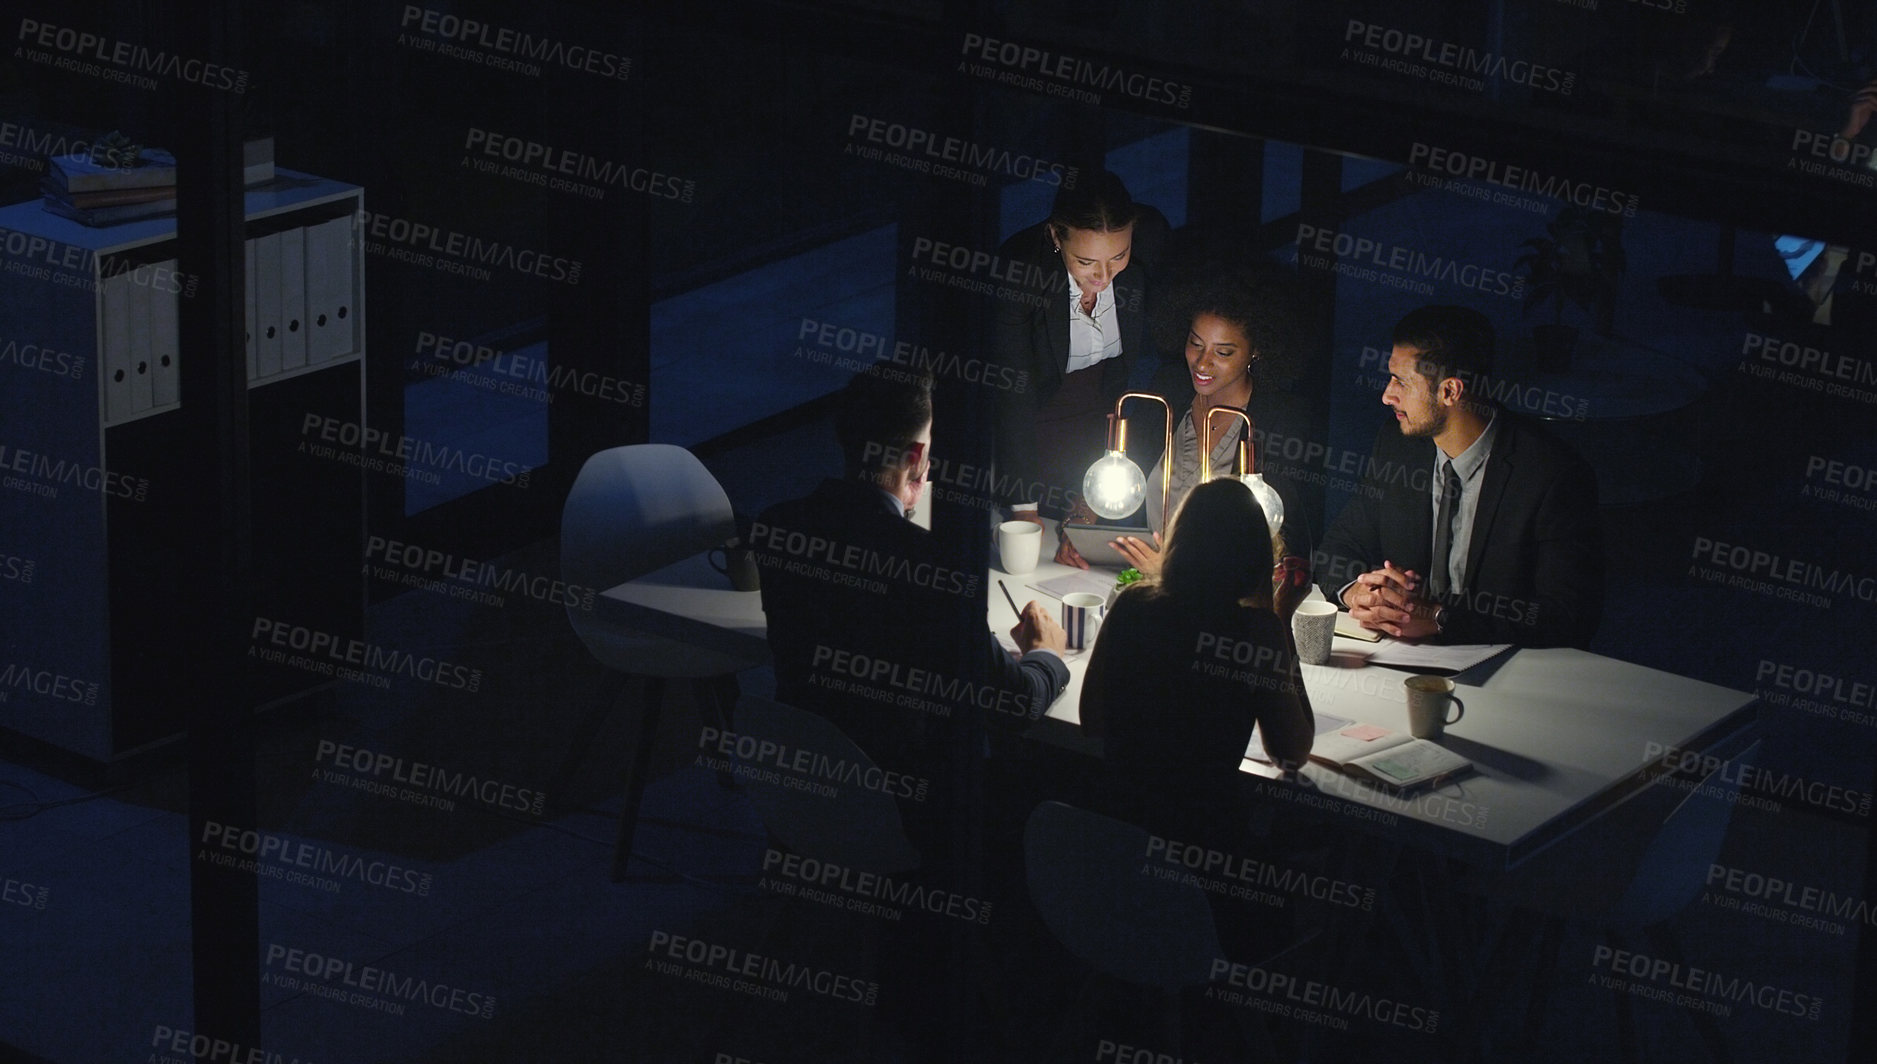 Buy stock photo Cropped shot of a diverse group of businesspeople sitting together and using a tablet during a meeting late at night